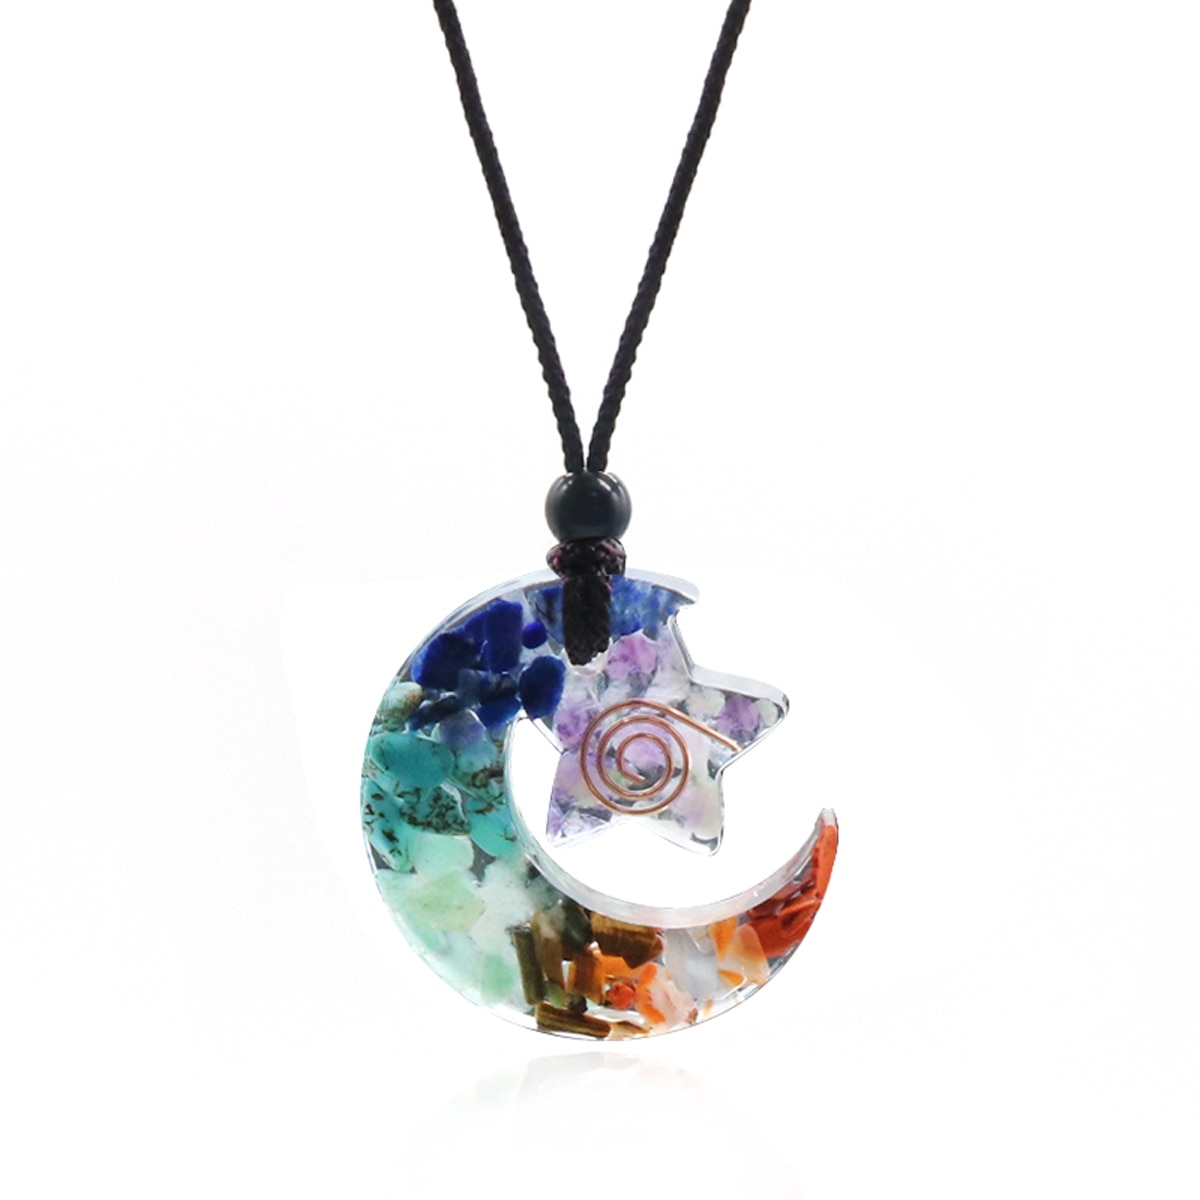 7 Chakra Healing Balance Pendant Necklace Star Moon Resin Crystal Chips Natural Stone Charms Reiki Yoga Jewelry Necklaces Gift